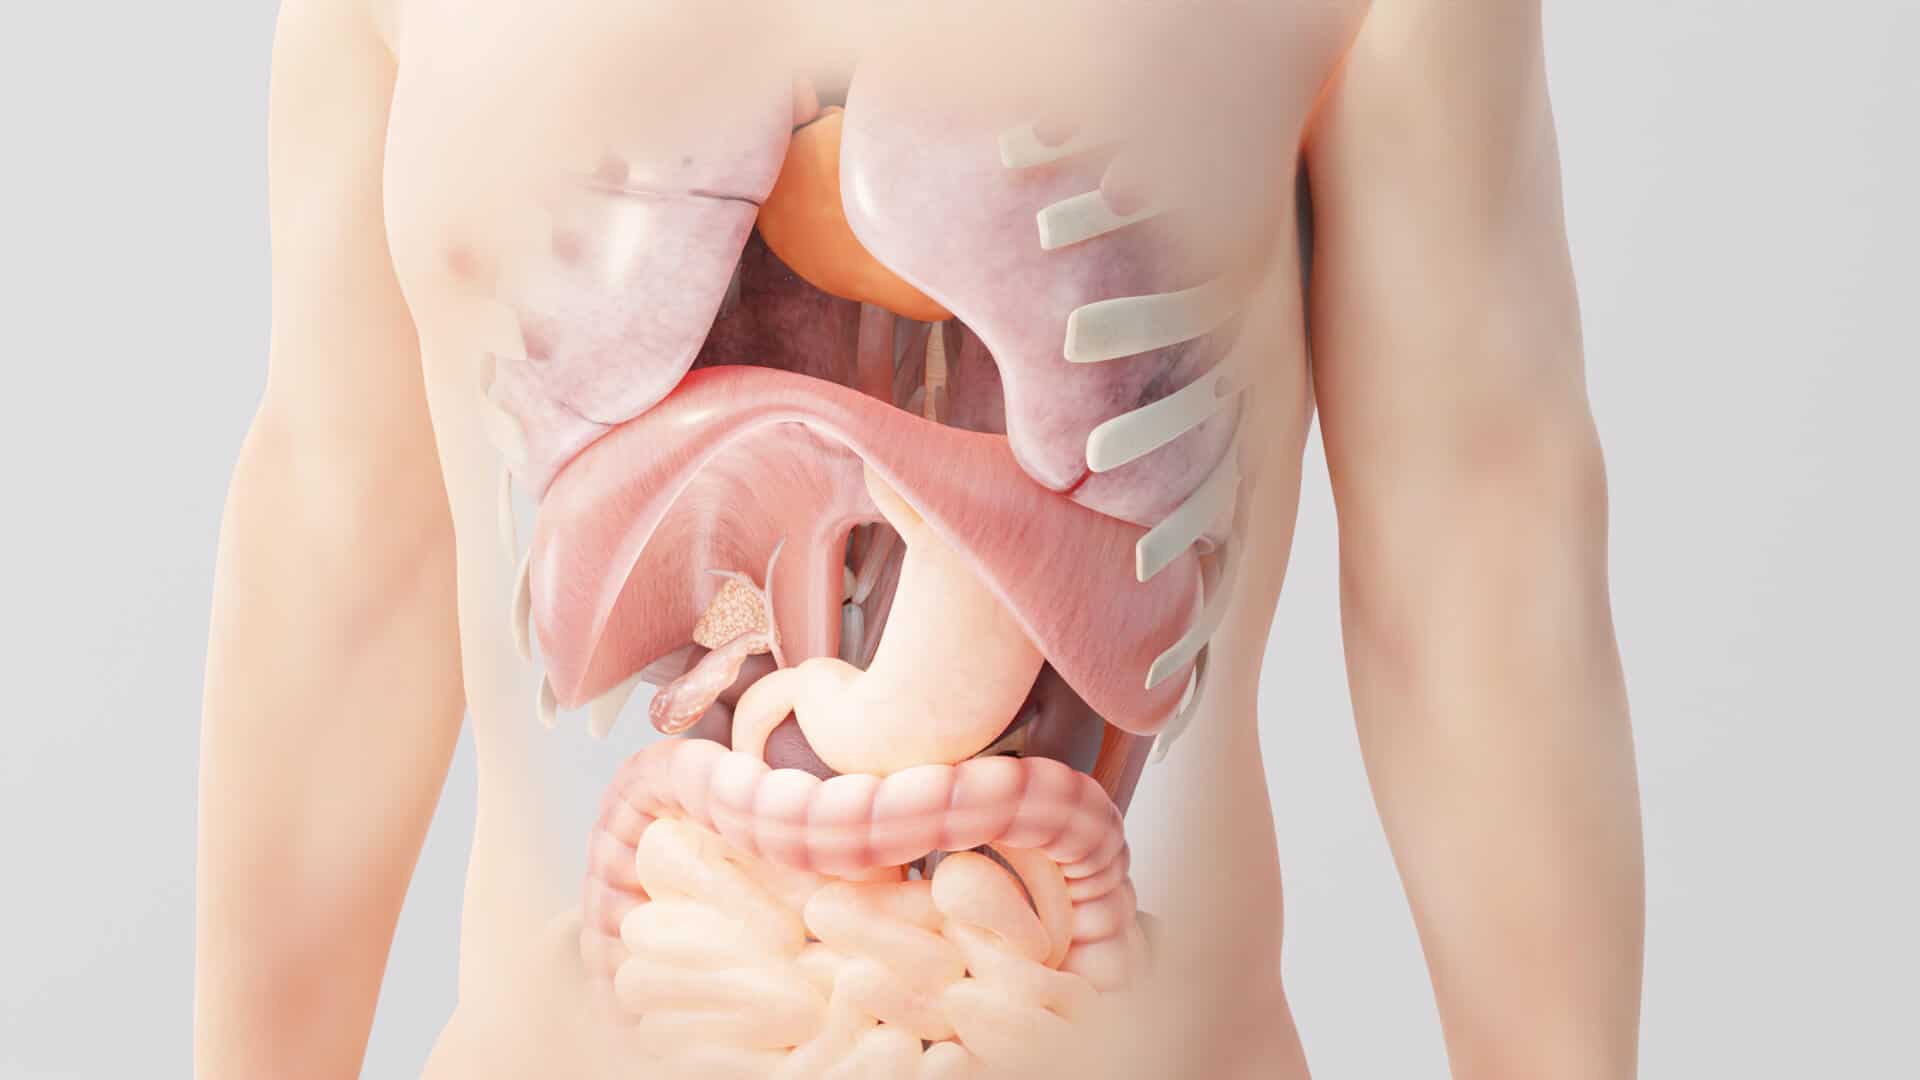 This is a 3D render of the human body, showing see-through of the skin into the internal organs like the diaphragm, liver and others.